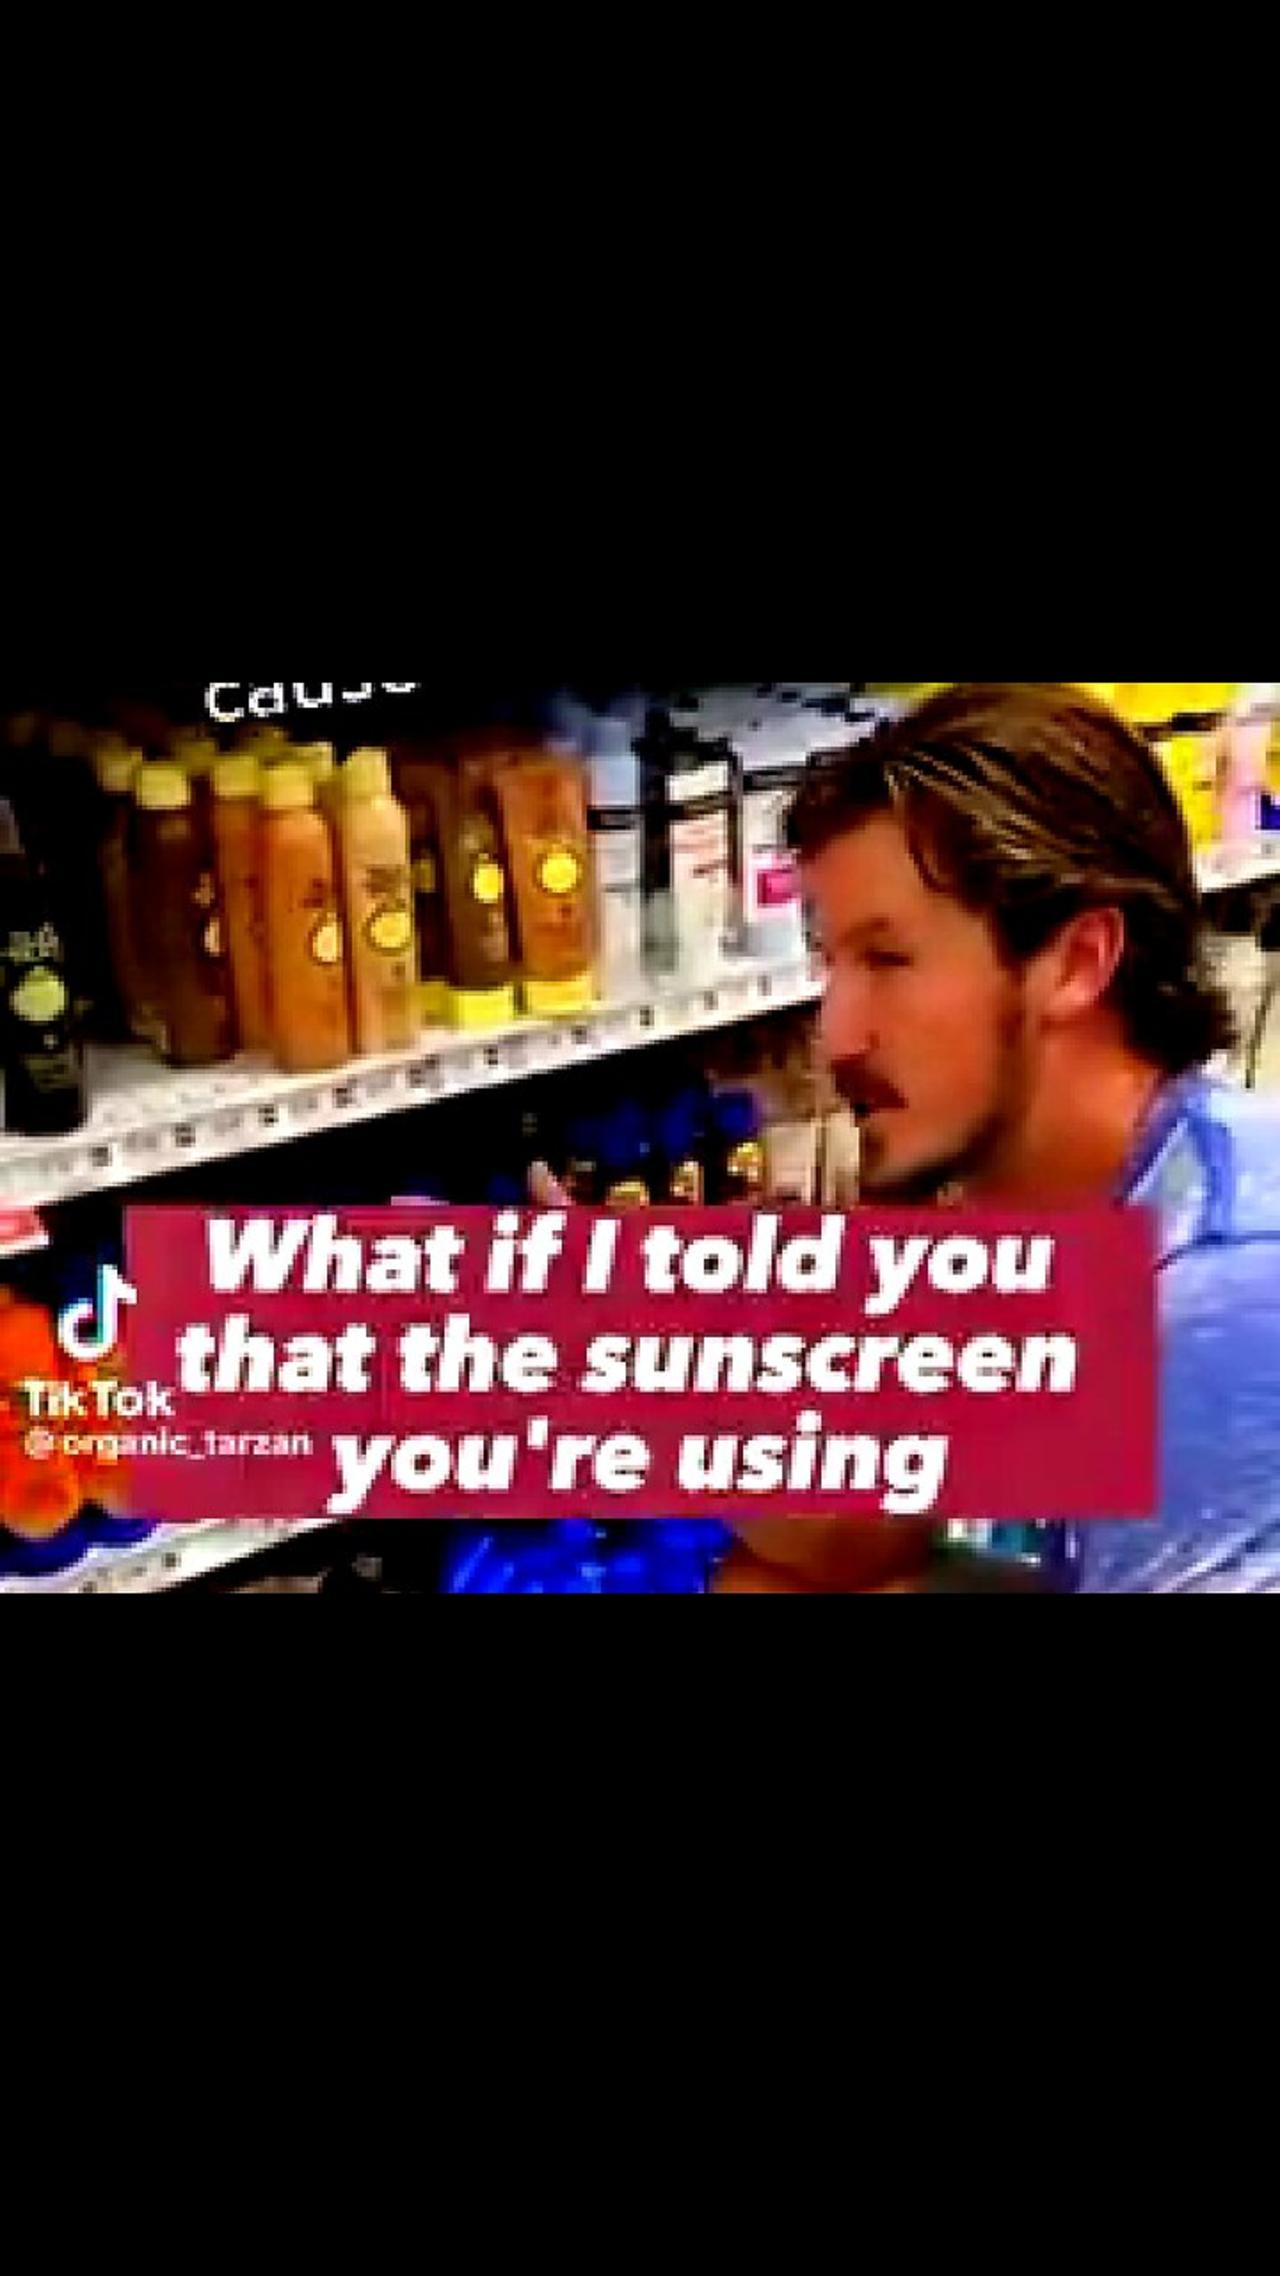 HOT OUTSIDE? RUB ON THAT CANCER CAUSING [Video]